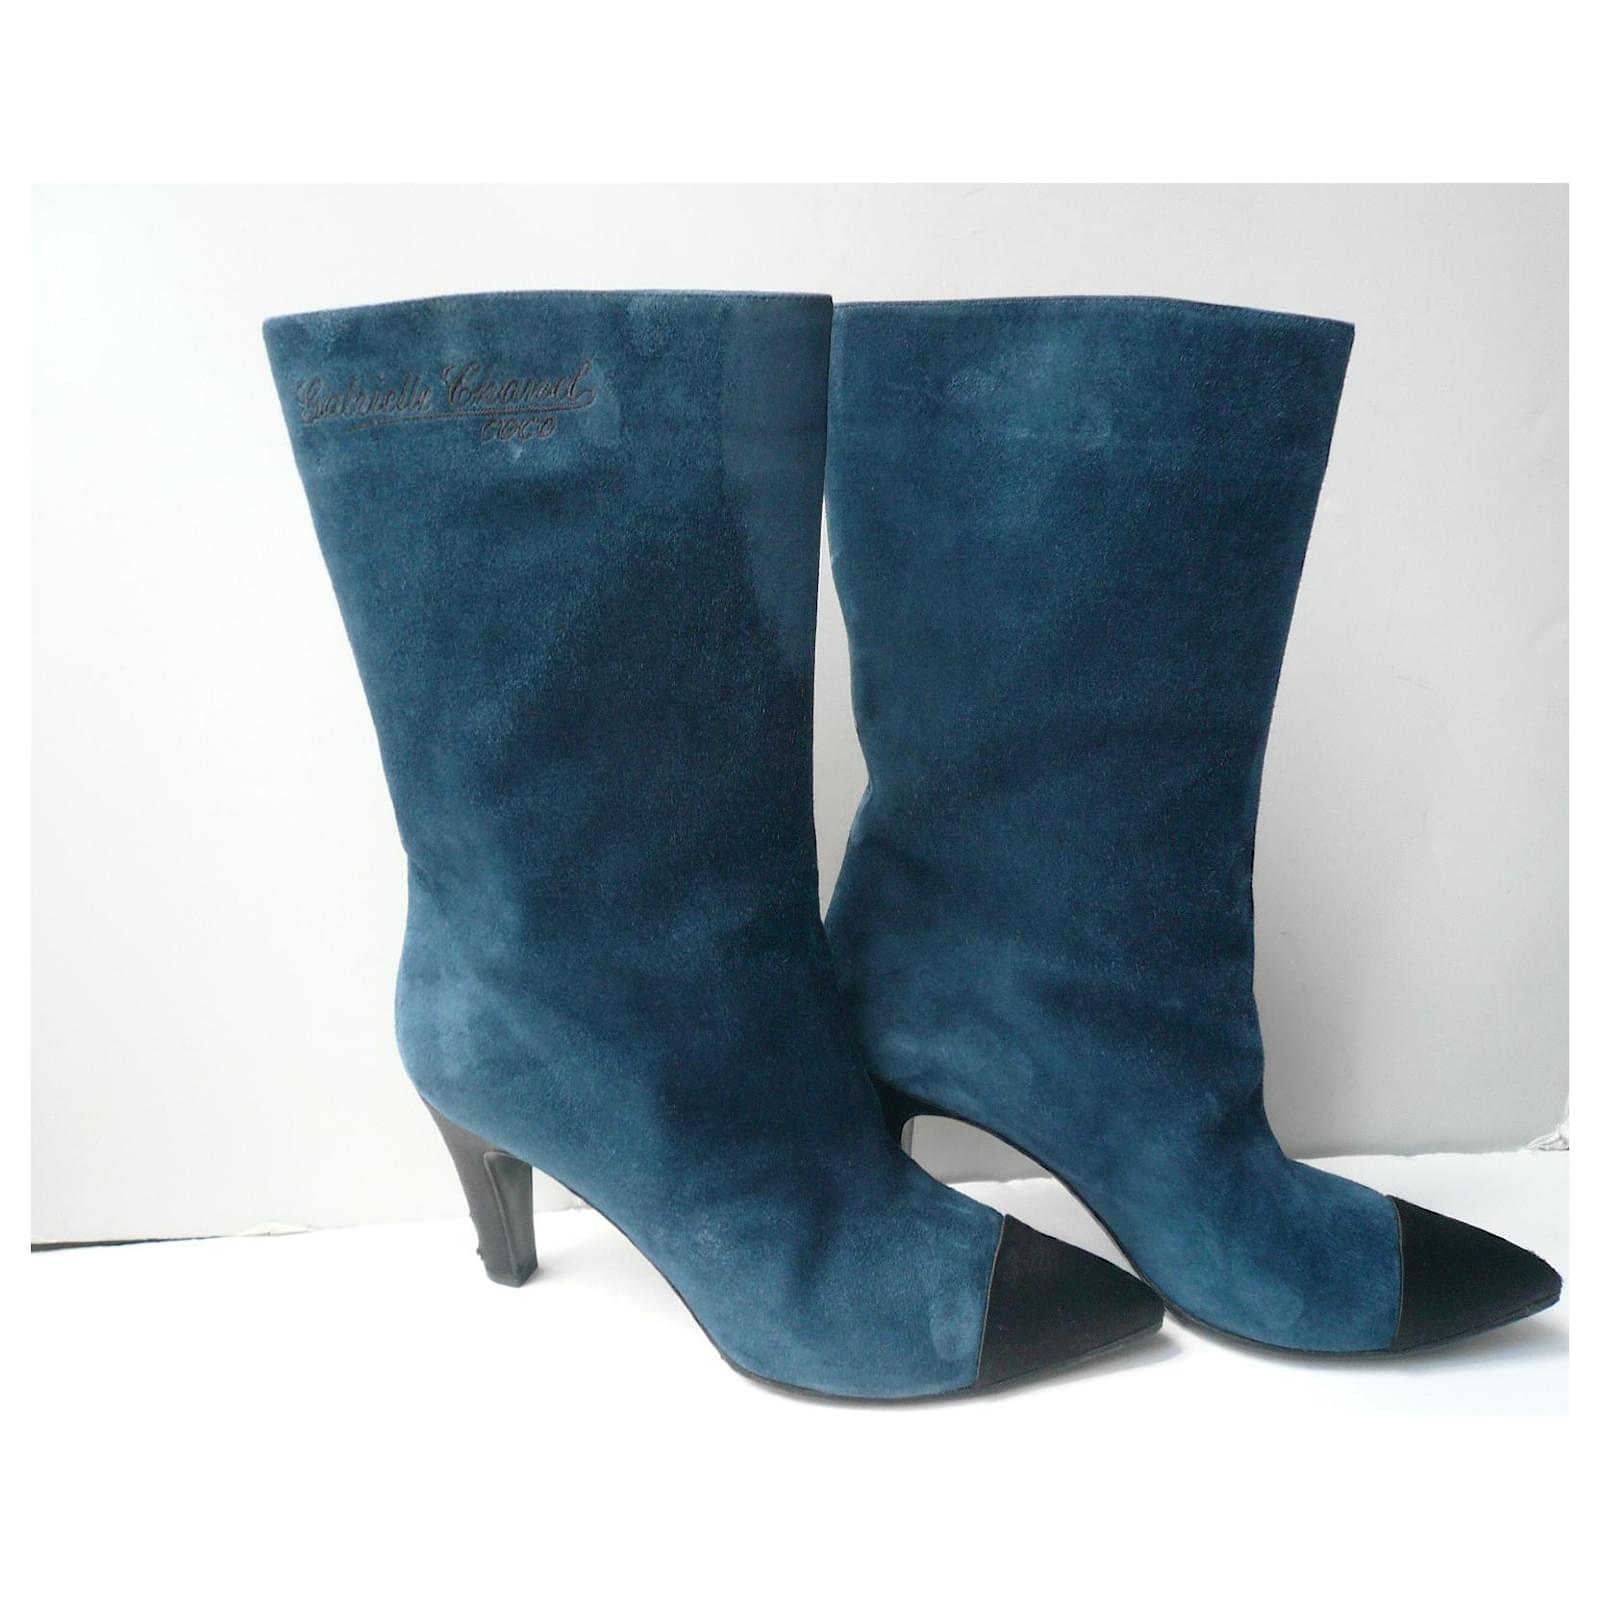 CHANEL Gabrielle Coco midnight blue boots.40,5 It